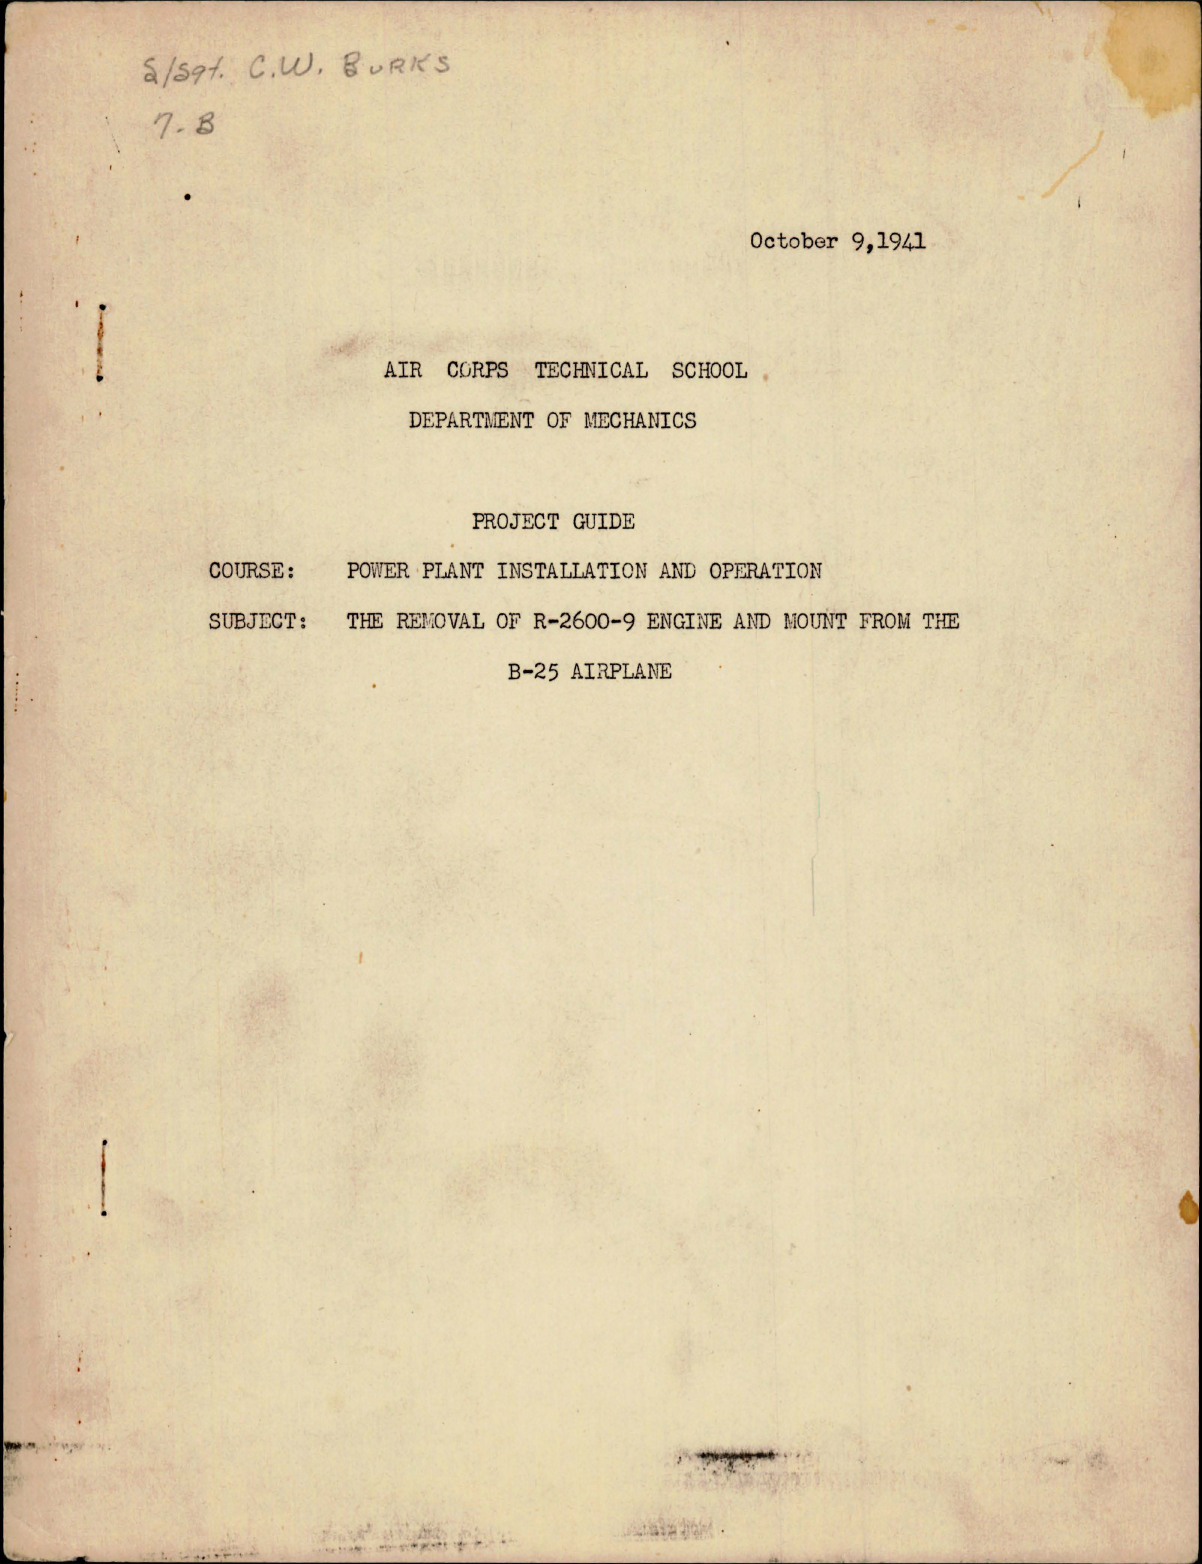 Sample page 1 from AirCorps Library document: Project Guide for Power Plant Installation and Operation for Removal of R-2600-9 Engine and Mount from the B-25 